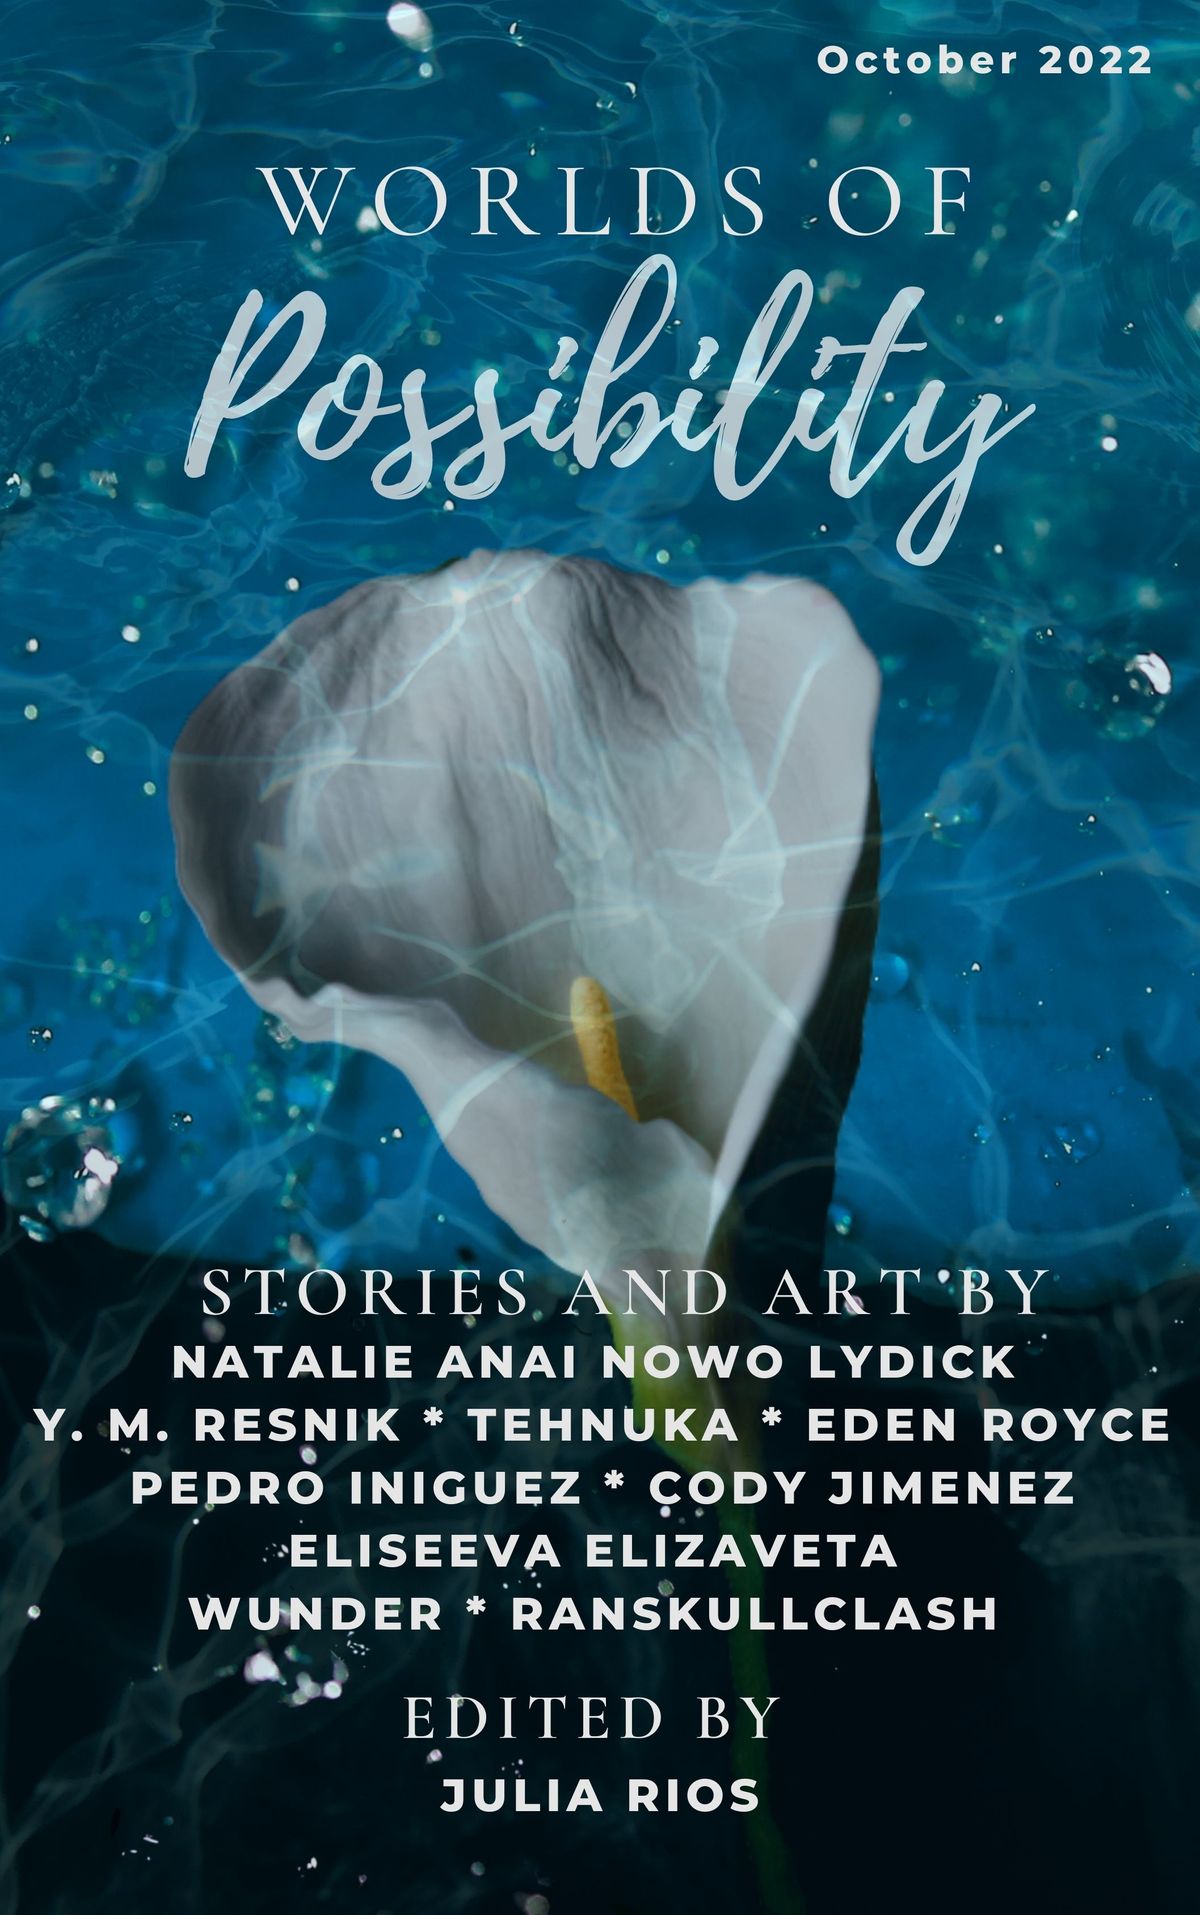 Cover Reveal for the October 2022 Issue of Worlds of Possibility